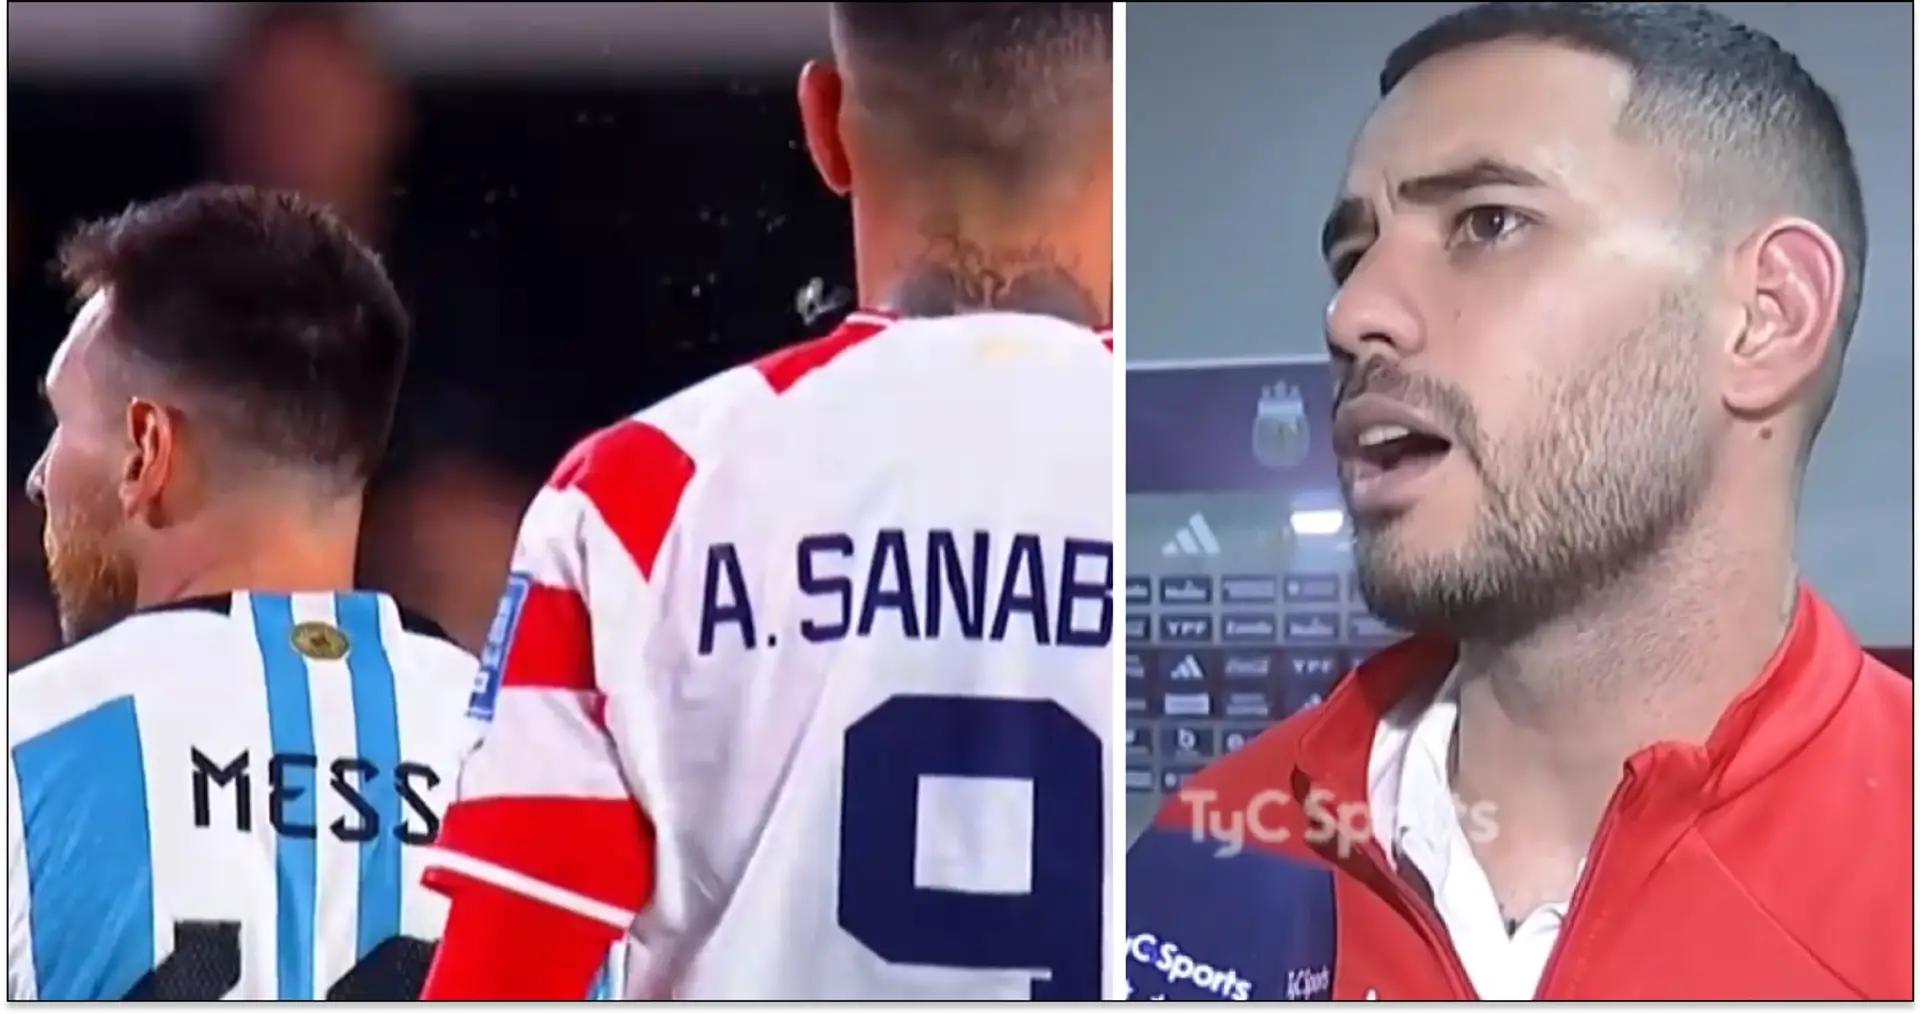 Sanabria comments on Messi spitting incident